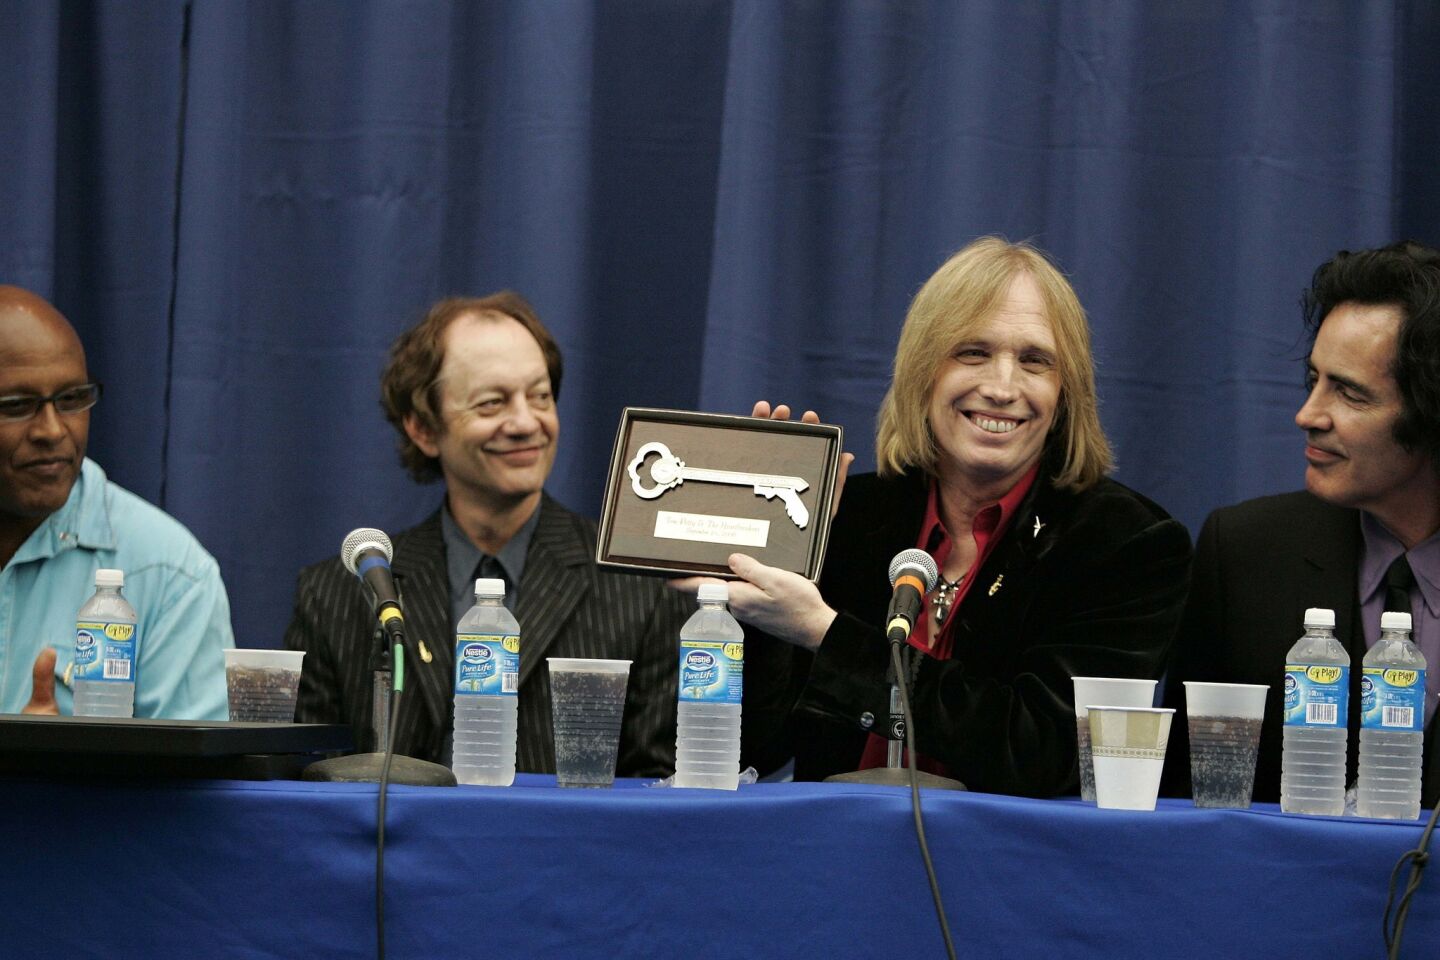 Tom Petty holds up the key to the city of Gainesville, Fla., he received from Mayor Pegeen Hanrahan in 2006. From left are drummer Steve Ferrone, guitarist Scott Thurston, Petty and bassist Ron Blair.